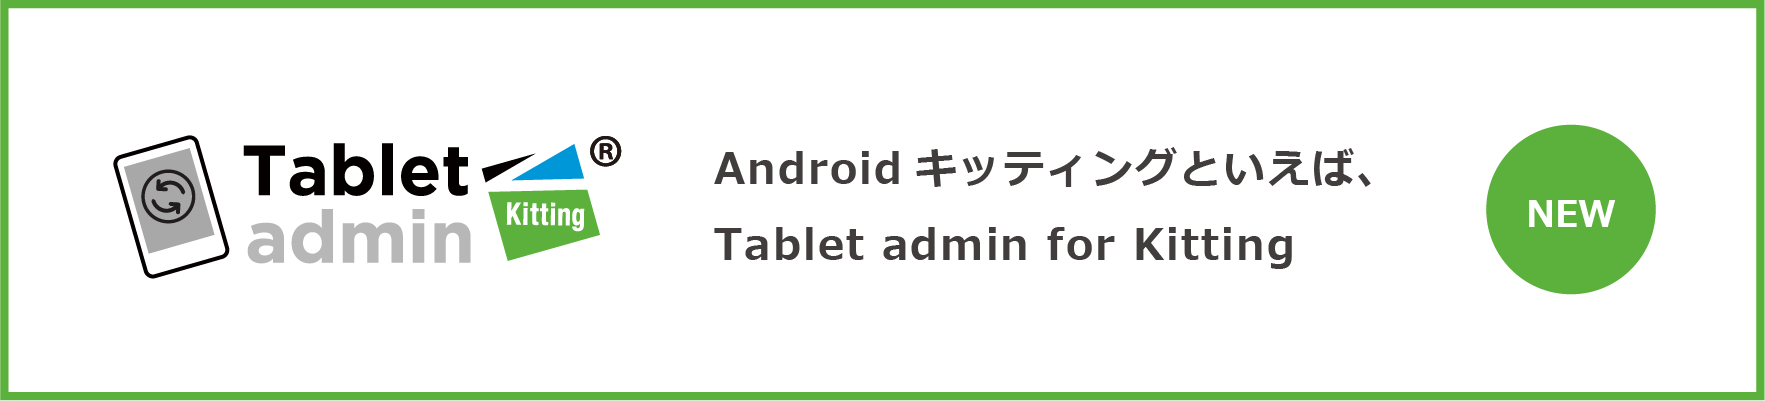 AndroidキッティングはTablet admin